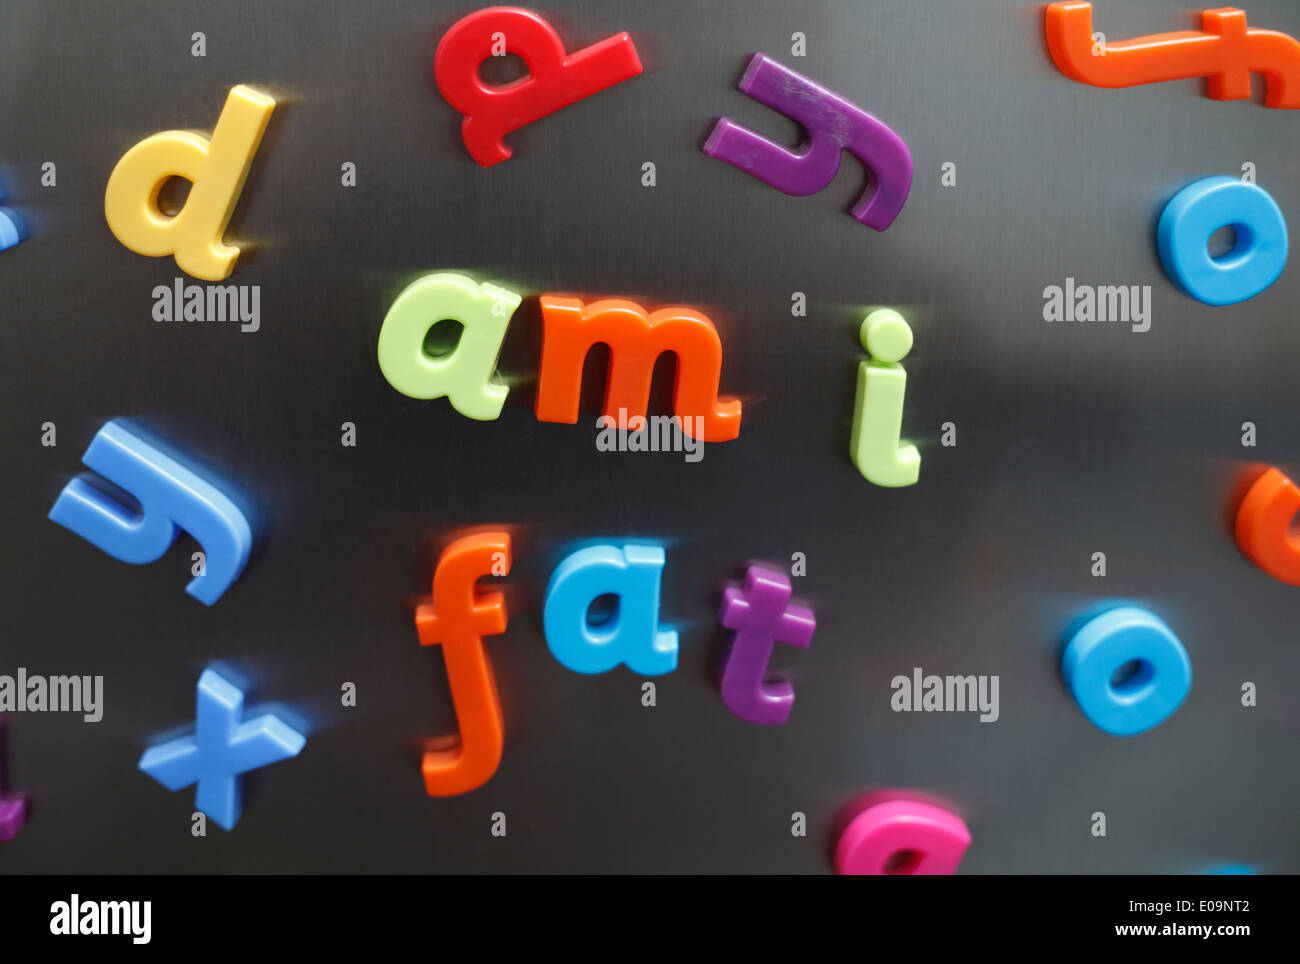 'am i fat' in plastic magnetic letters on a fridge door. Stock Photo